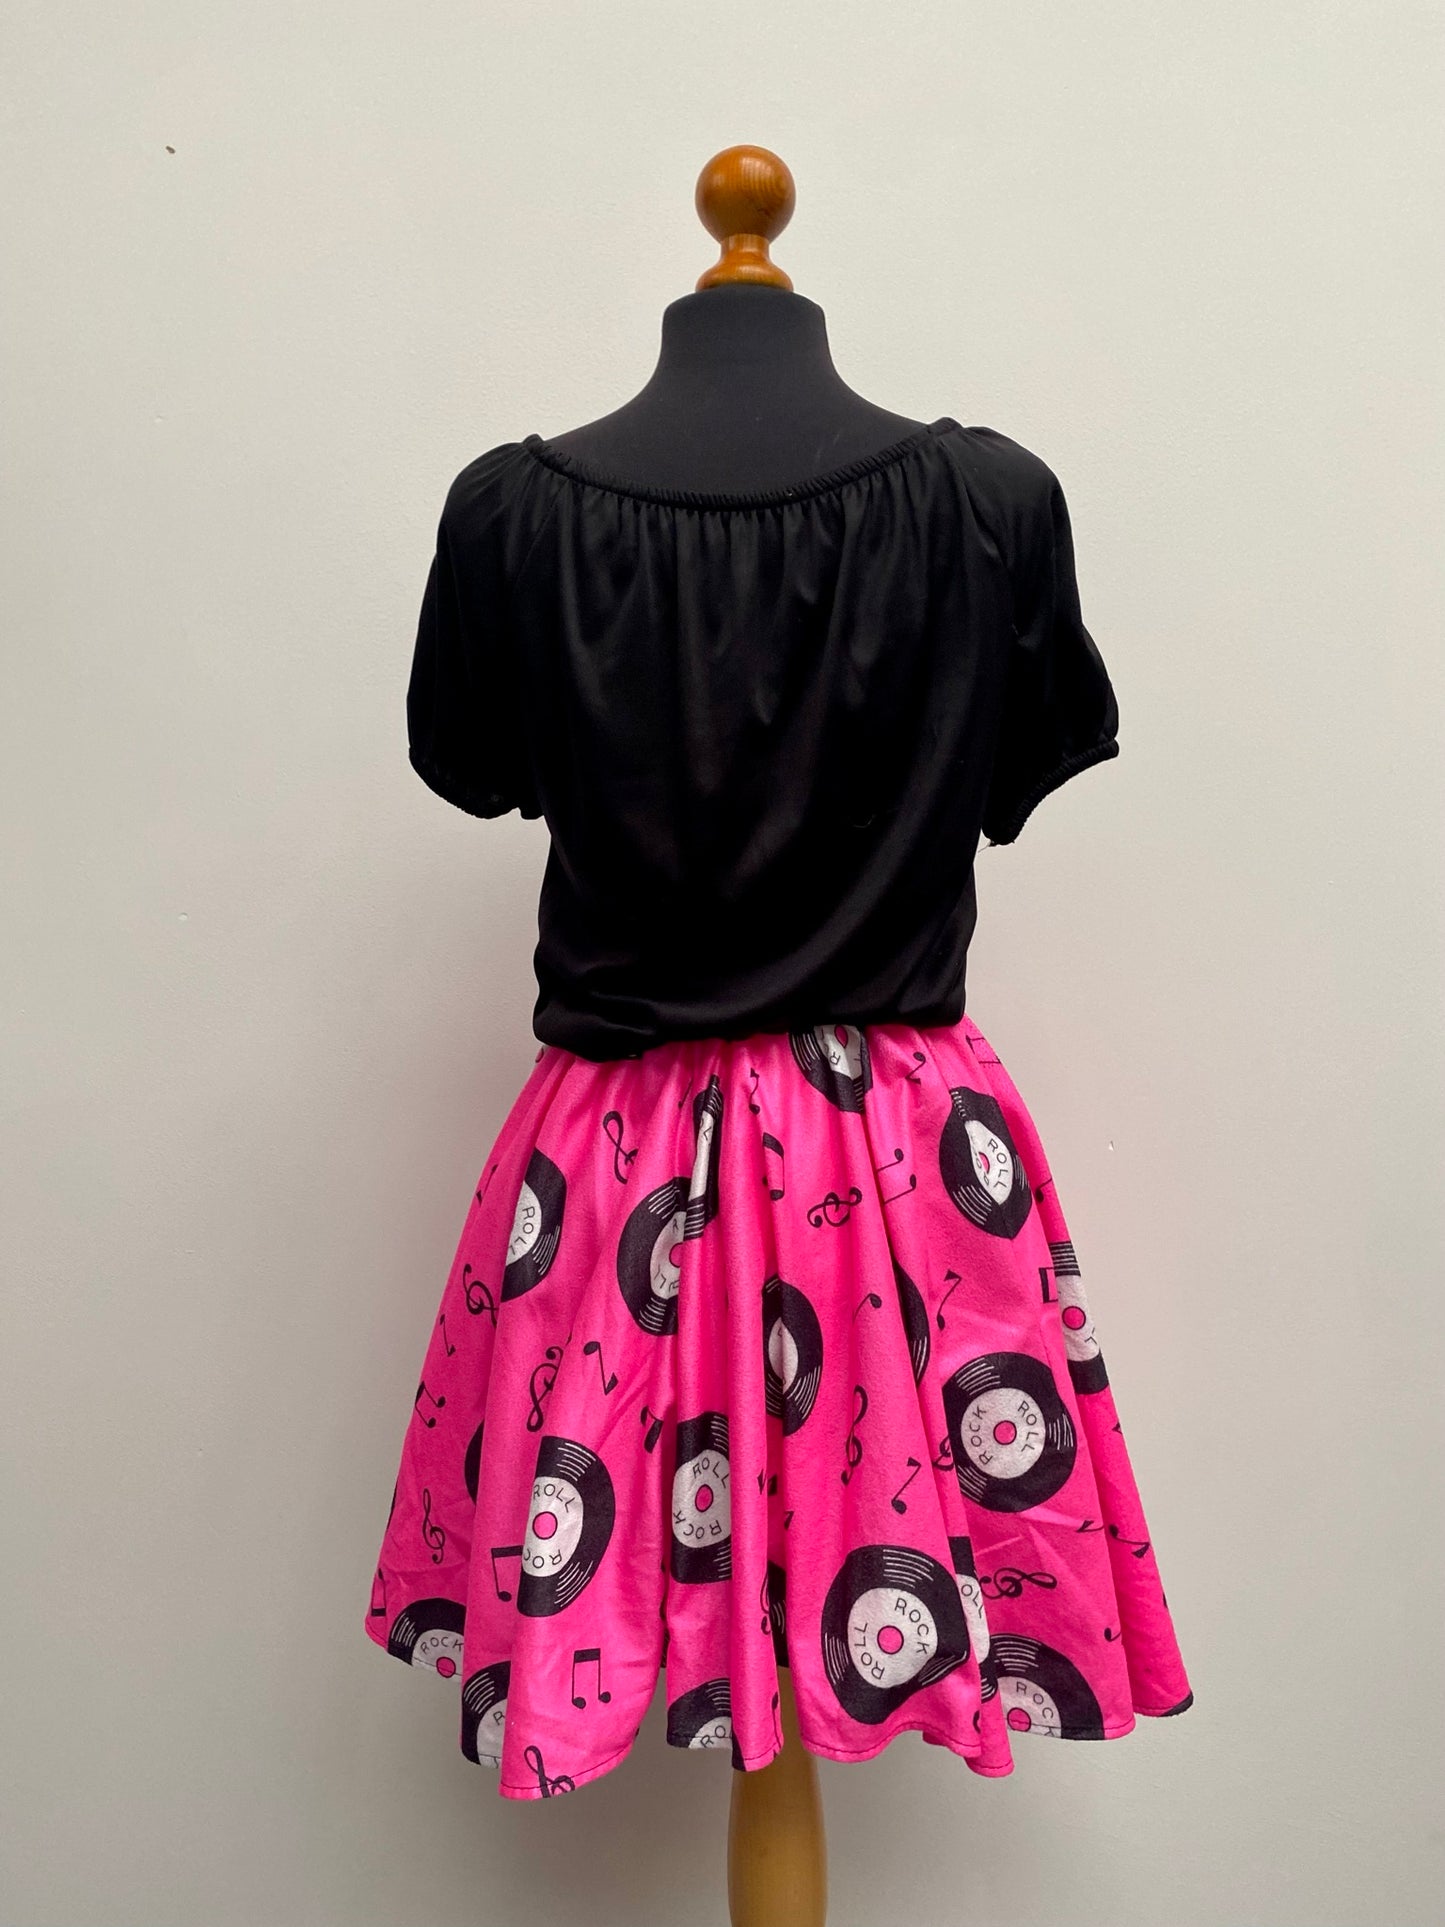 Ladies 50's pink black outfit record design dress Size 12 - Ex Hire Fancy Dress Costume